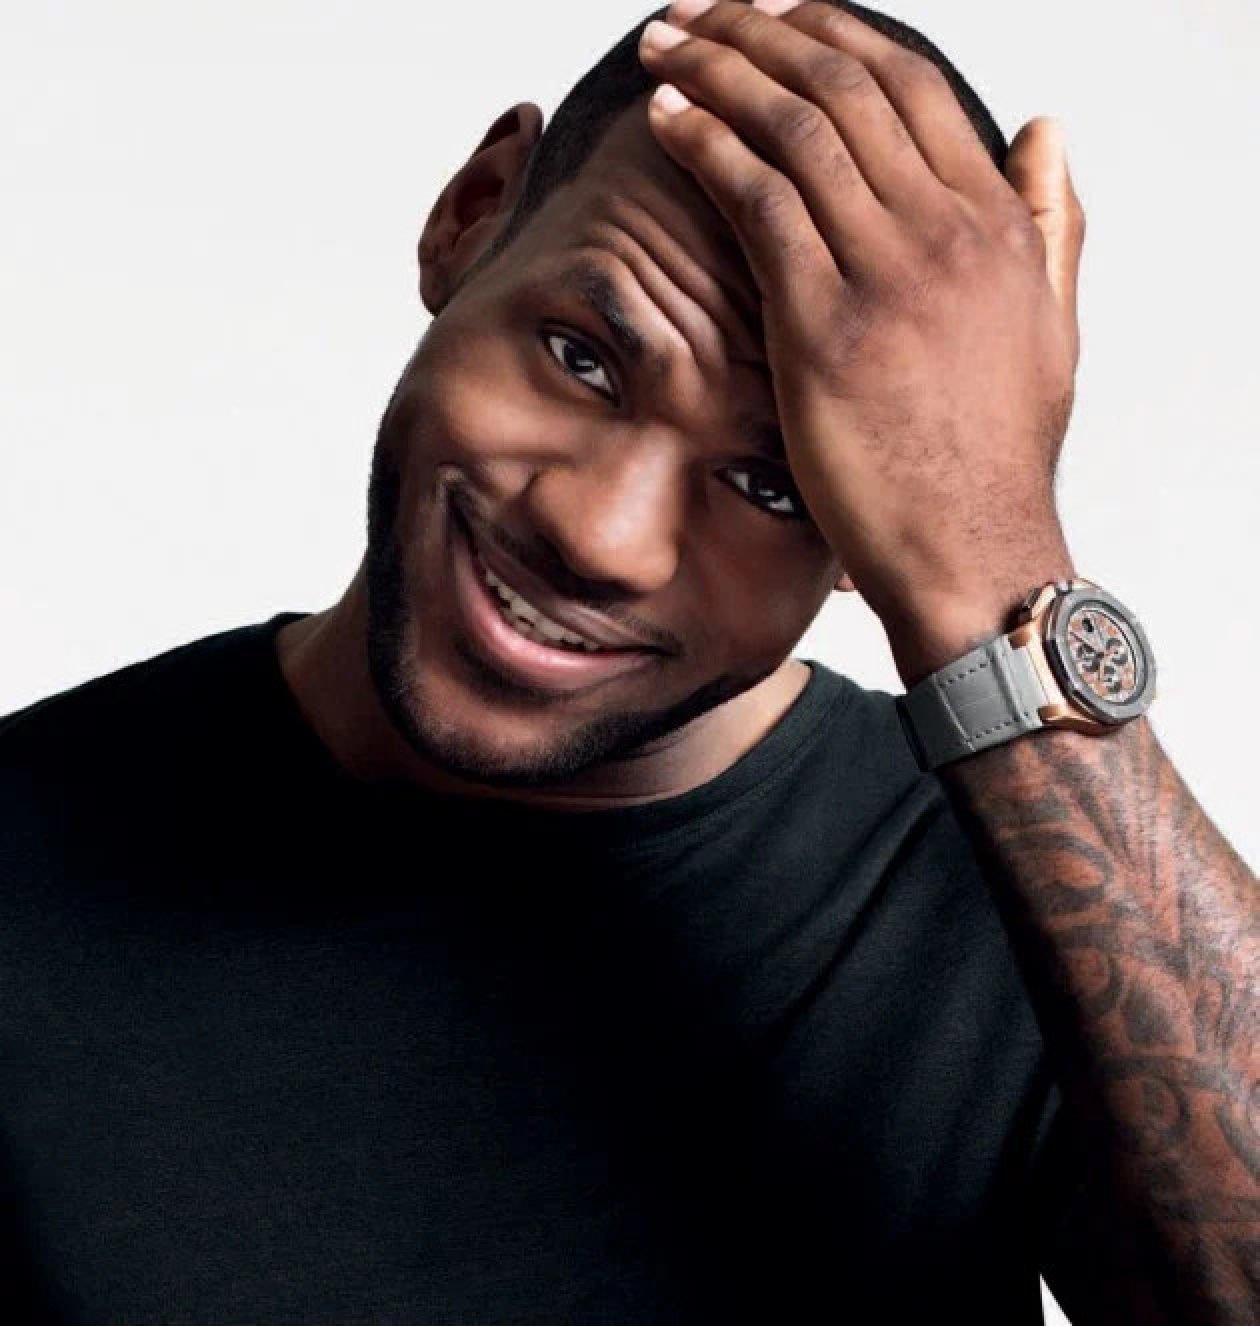 LeBron James Wears the $162,000 Black Panther Watch